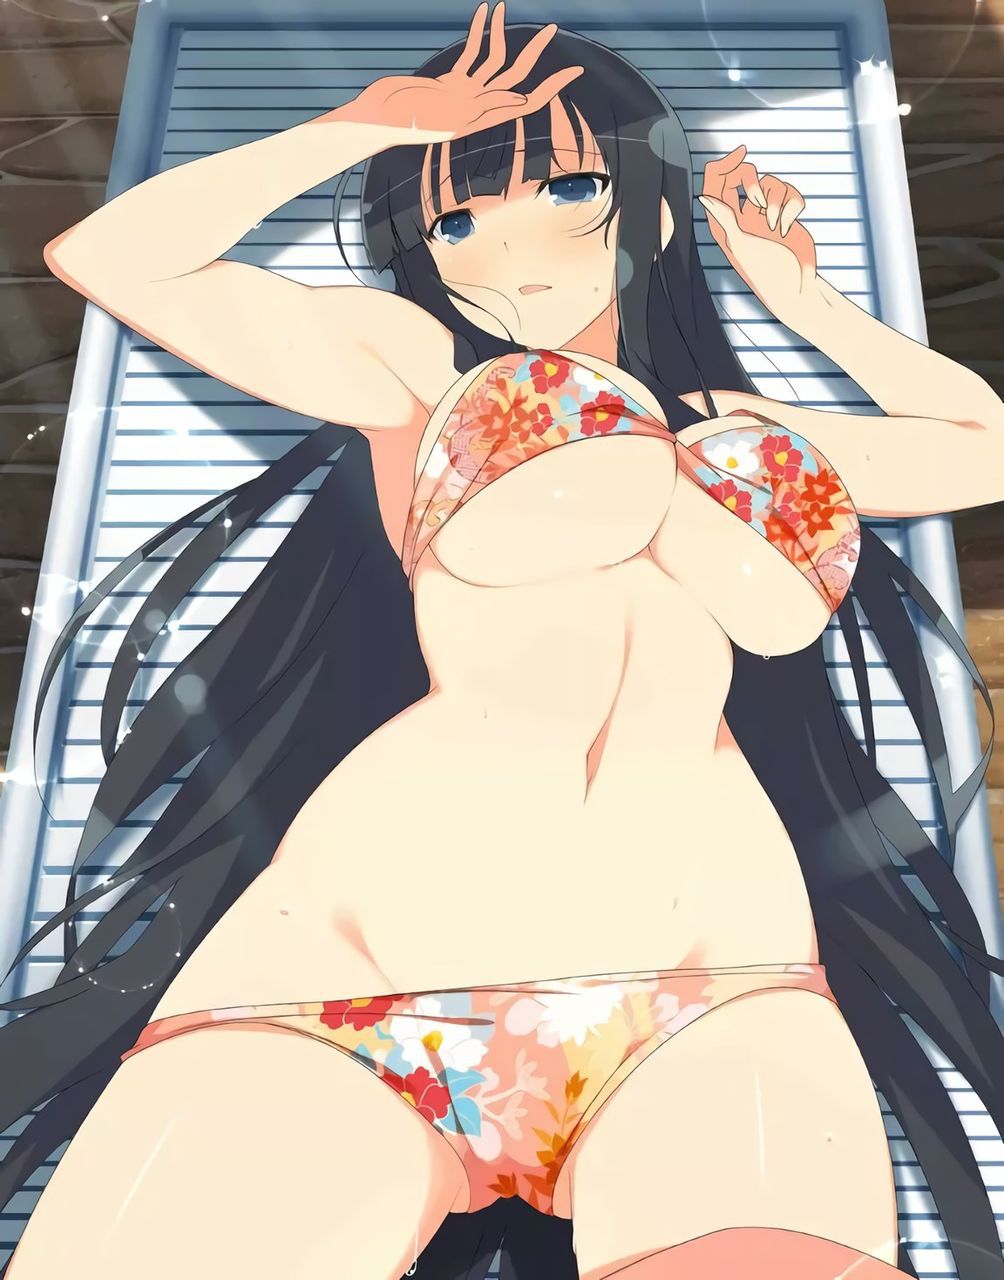 【Secondary Erotic】 Here is the erotic image of the characters appearing in Senran Kagura 29